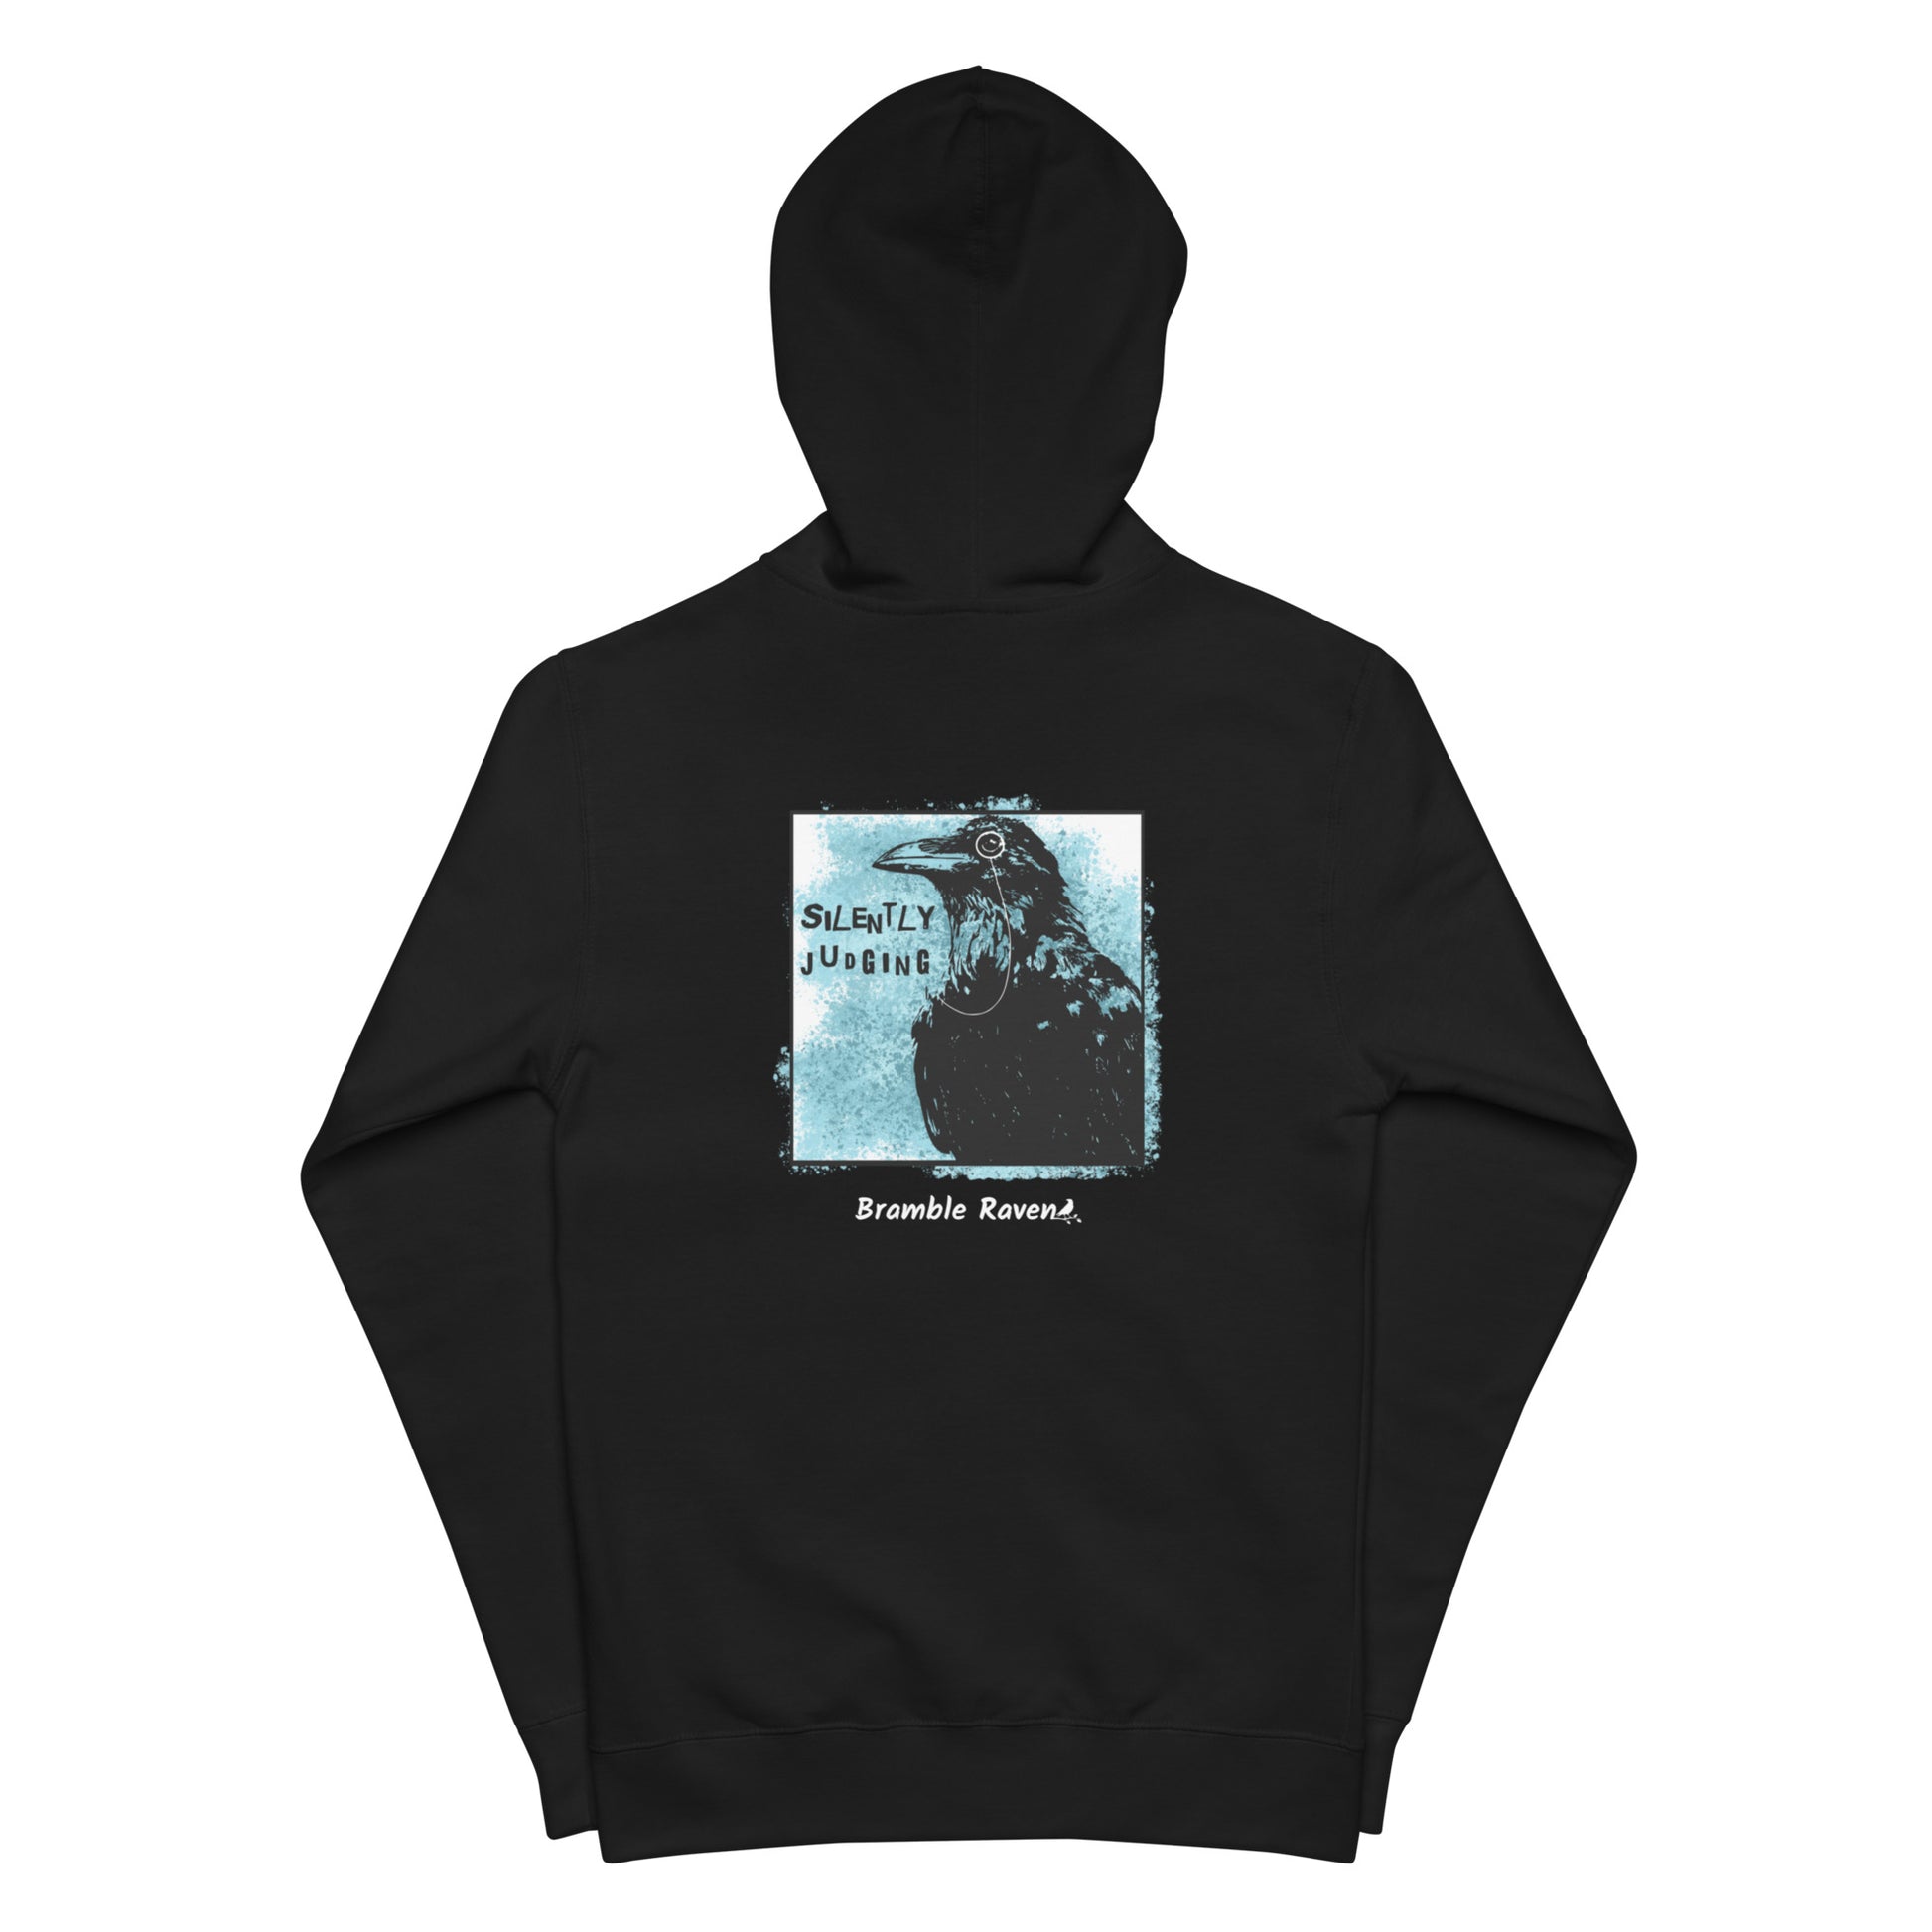 Unisex fleece-lined black colored zip-up hoodie with silently judging text by black crow wearing a monocle in a square with blue paint splatters.  Design on the back of hoodie.